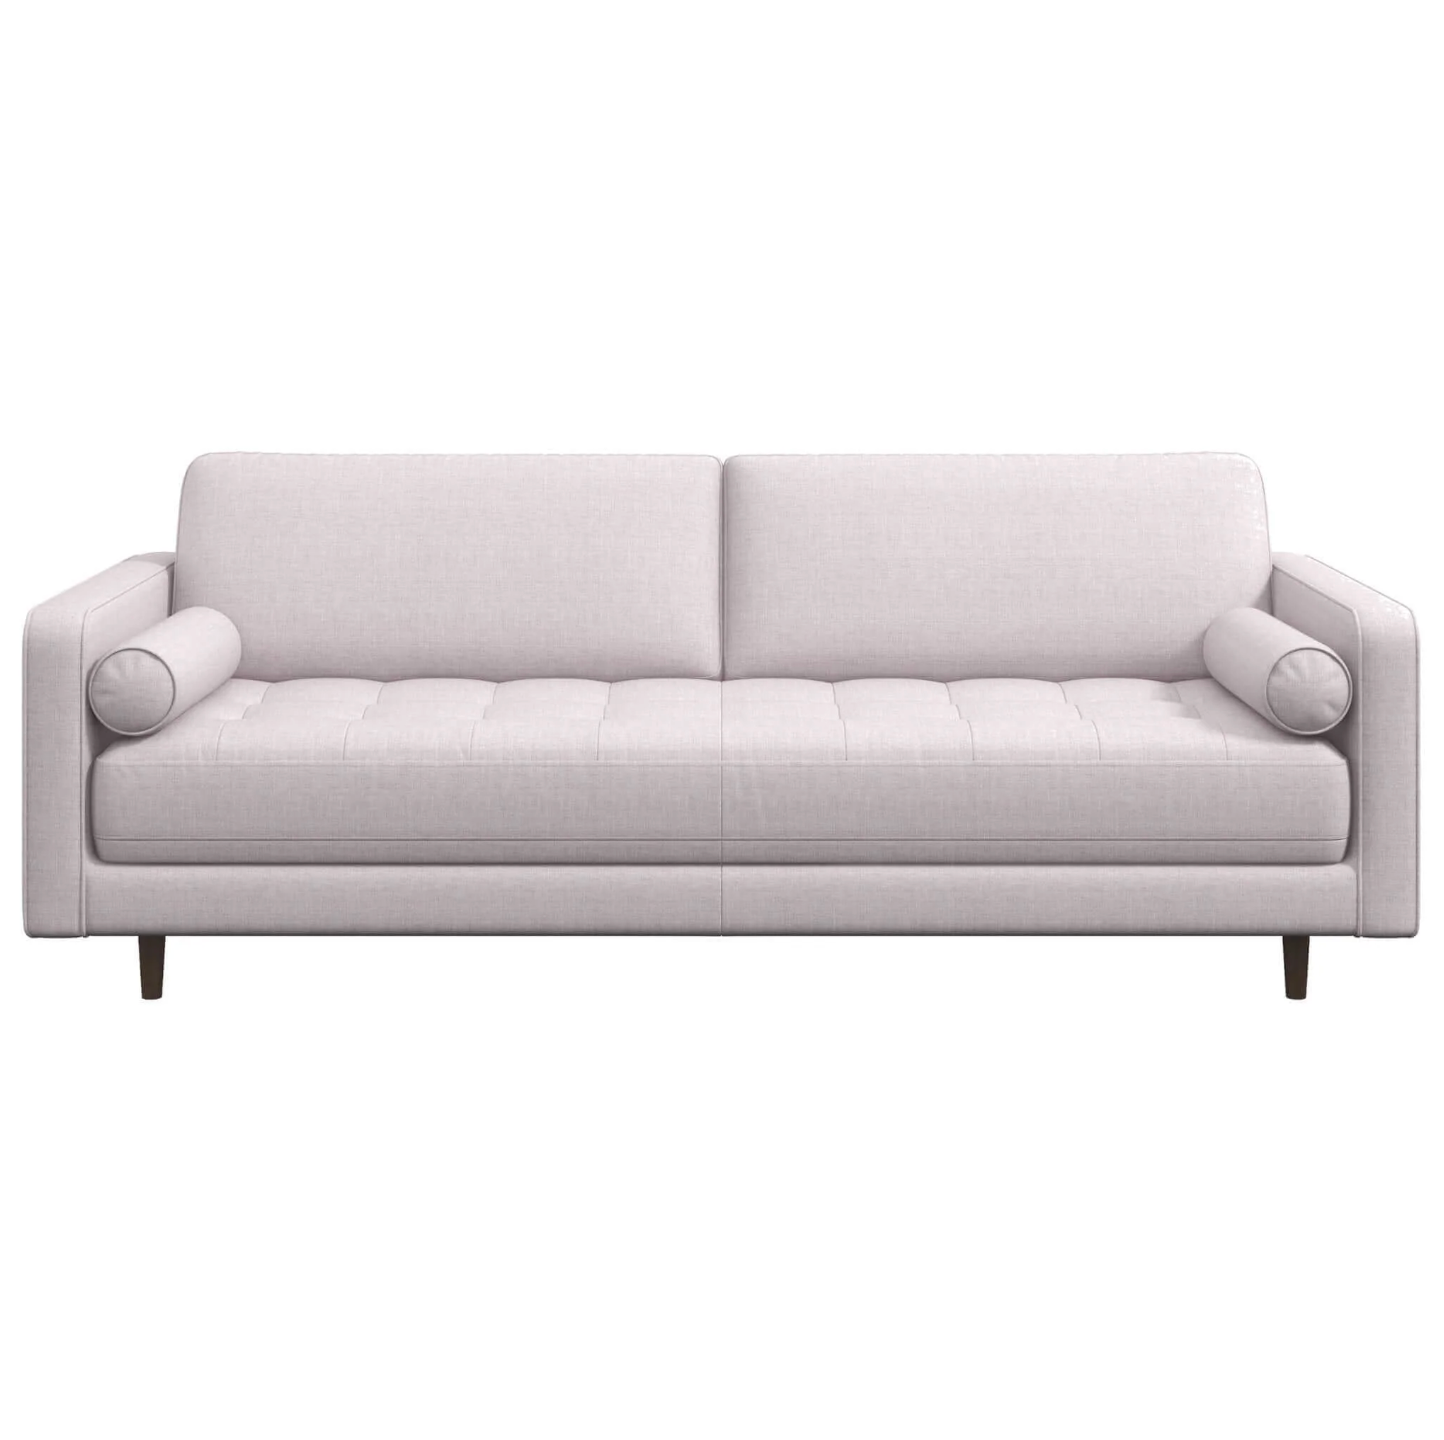 Anthony MCM Styled Tufted Sofa Couch 88"